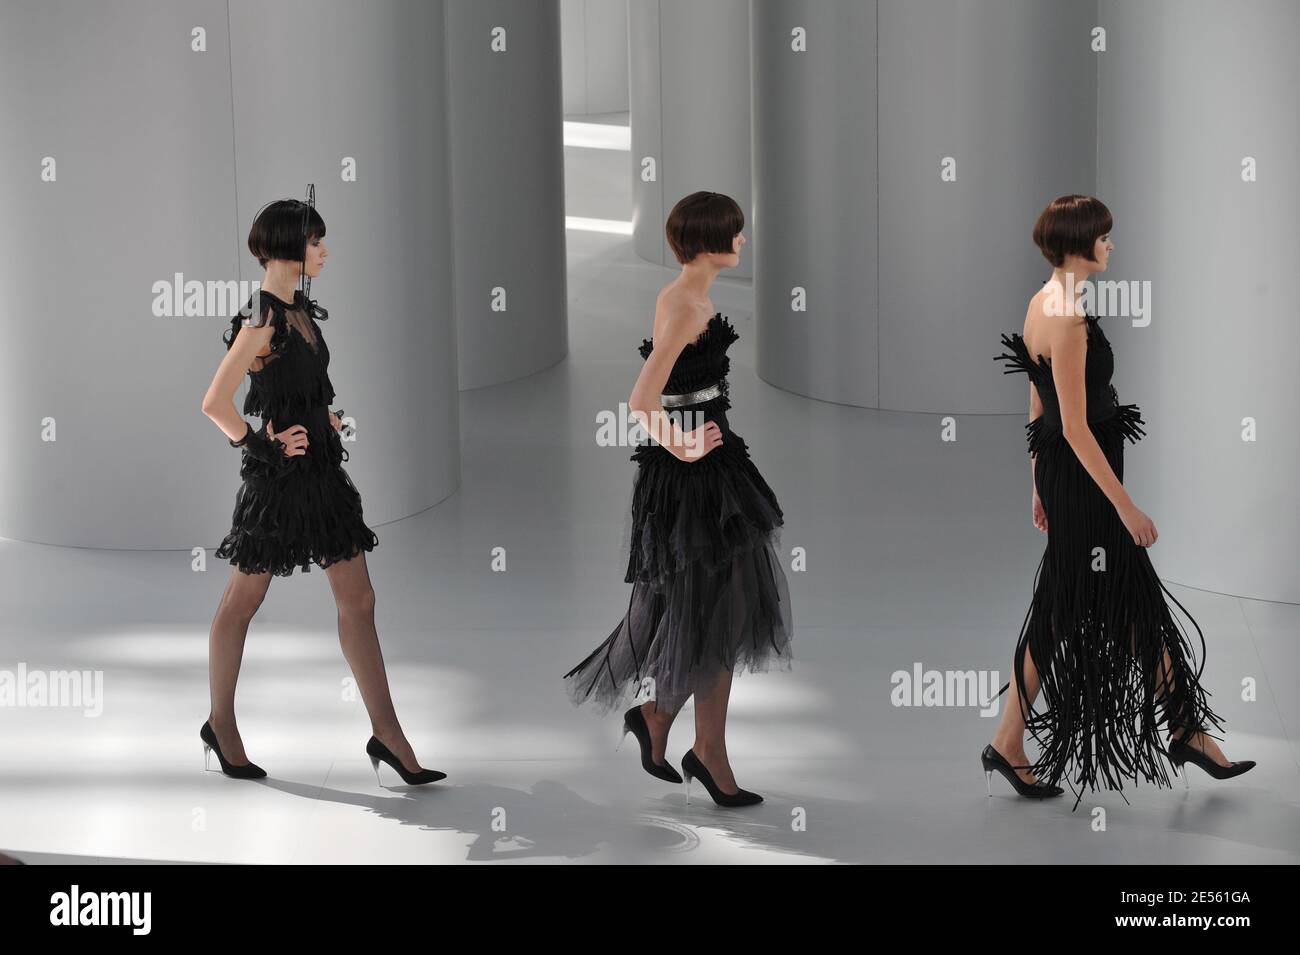 Models display a creation by designer Karl Lagerfeld for Chanel fall winter  2008-2009 Haute-Couture collection show in Paris, France on July 1st, 2008.  Photo by Thierry Orban/ABACAPRESS.COM Stock Photo - Alamy